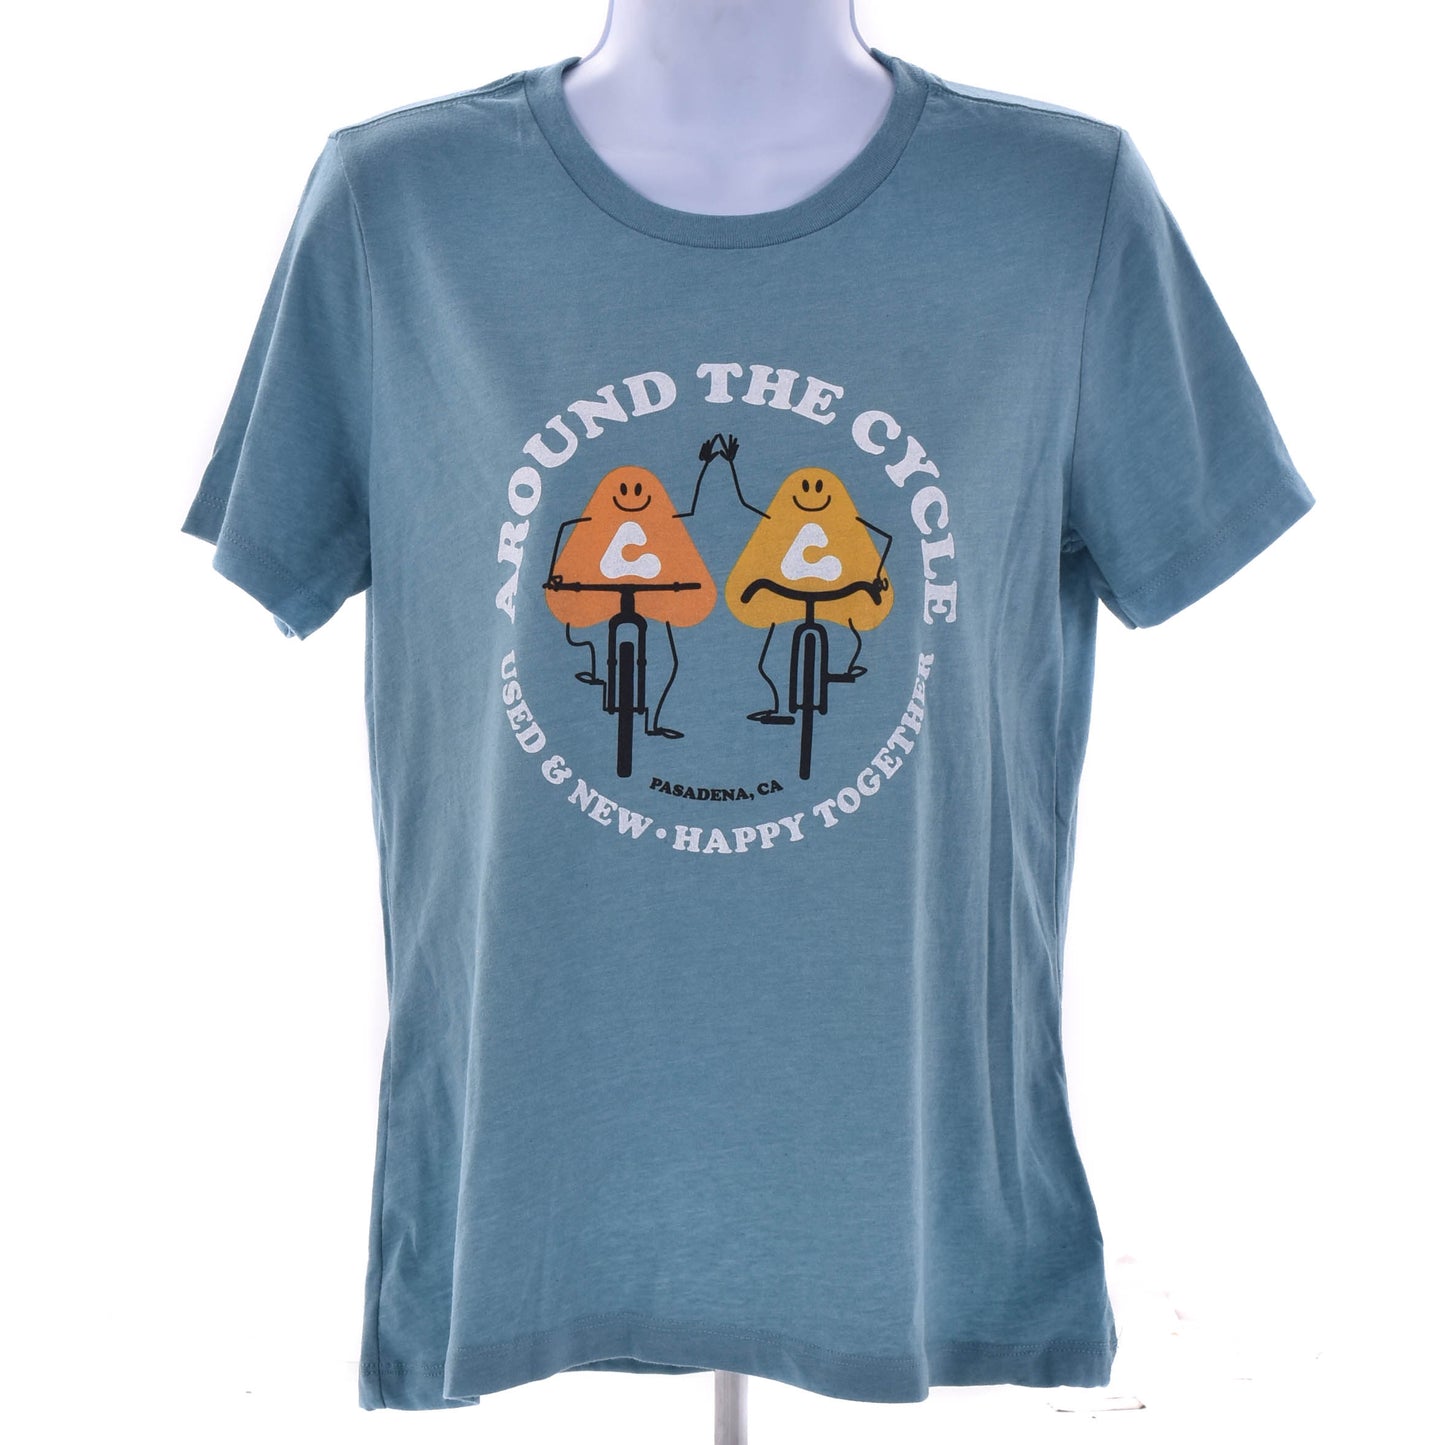 NEW ATC Tee Shirt - Women's - Happy Together